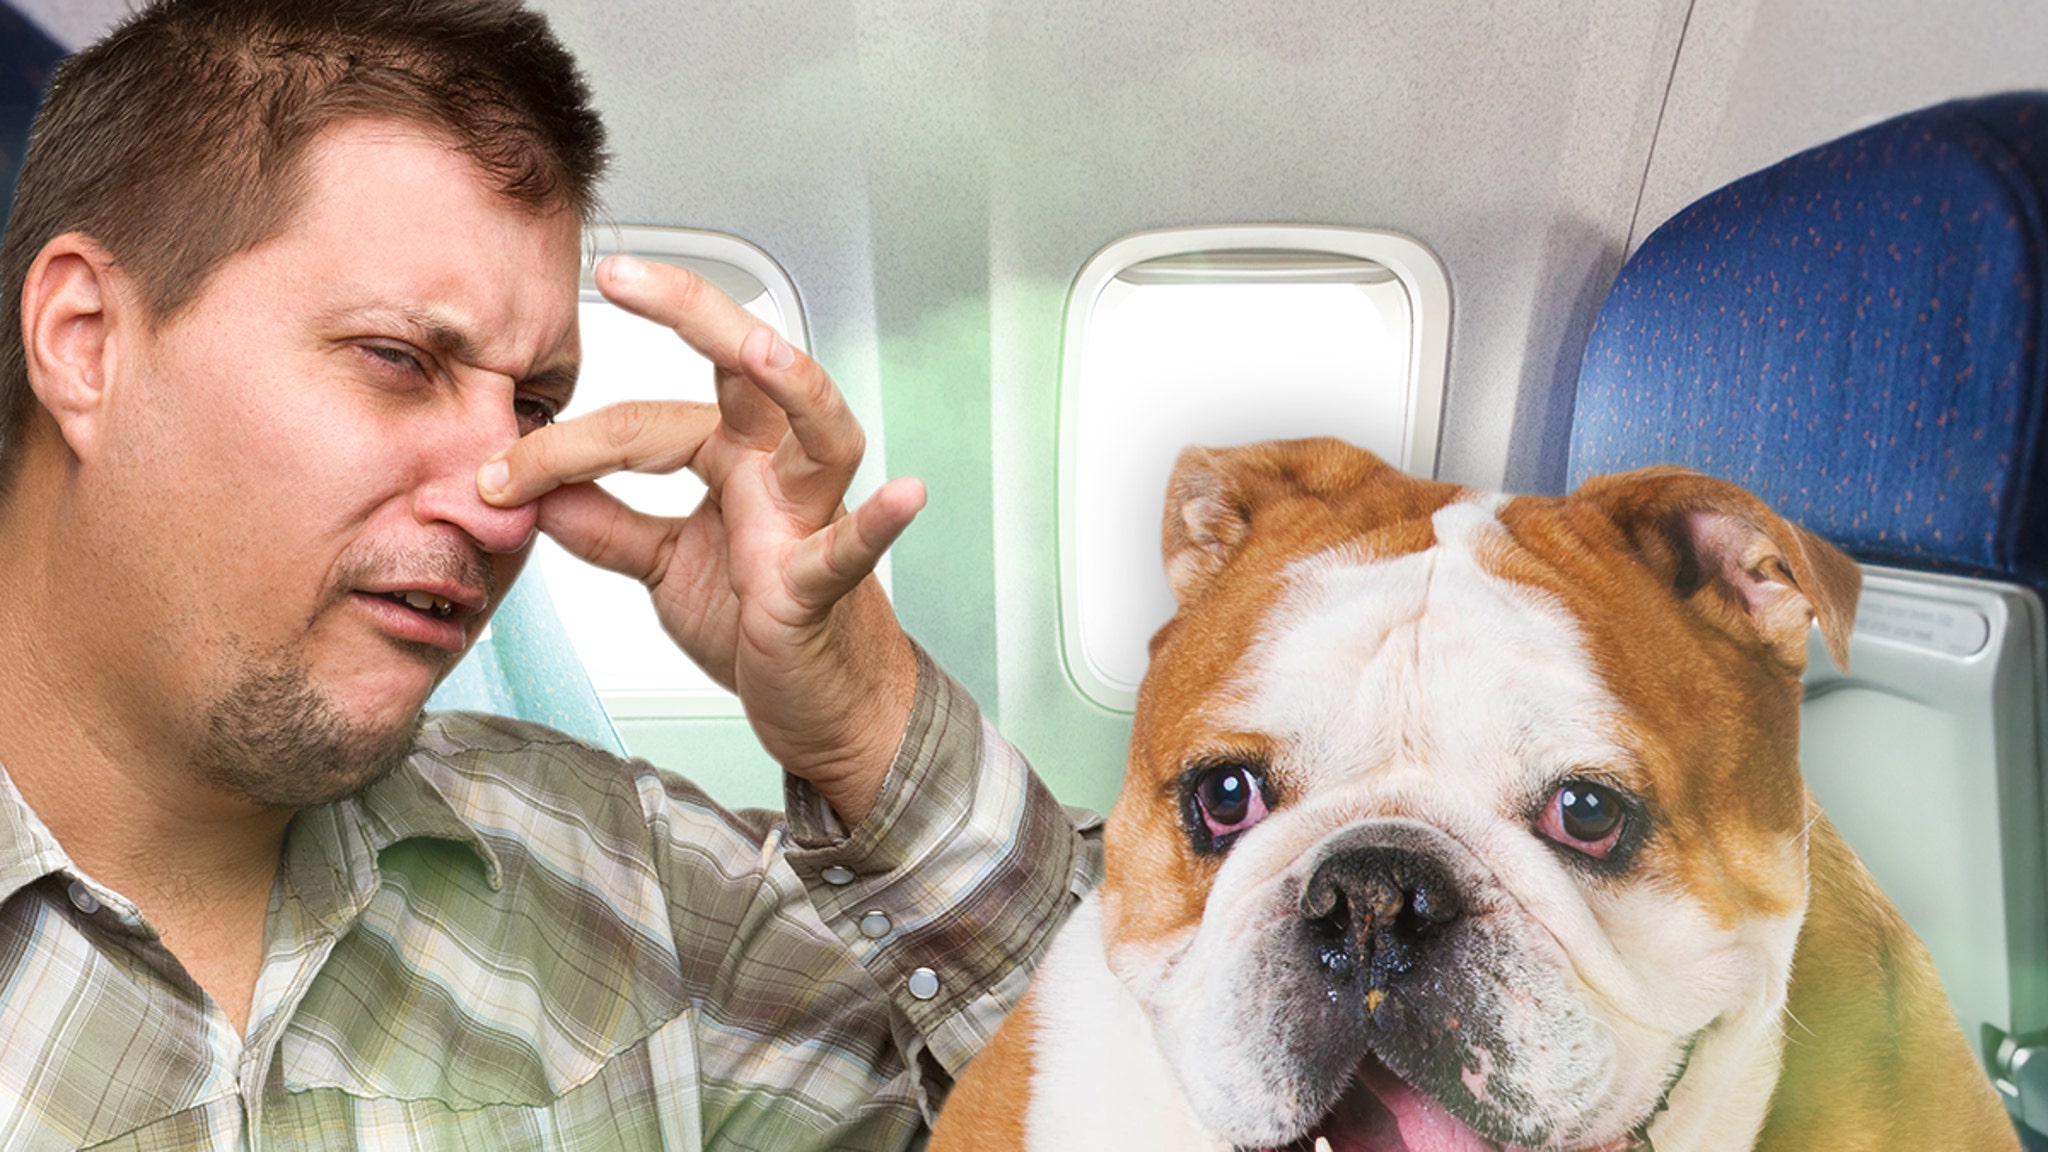 Farting Dog on Singapore Airlines Flight Gets Passengers ,400 Refund